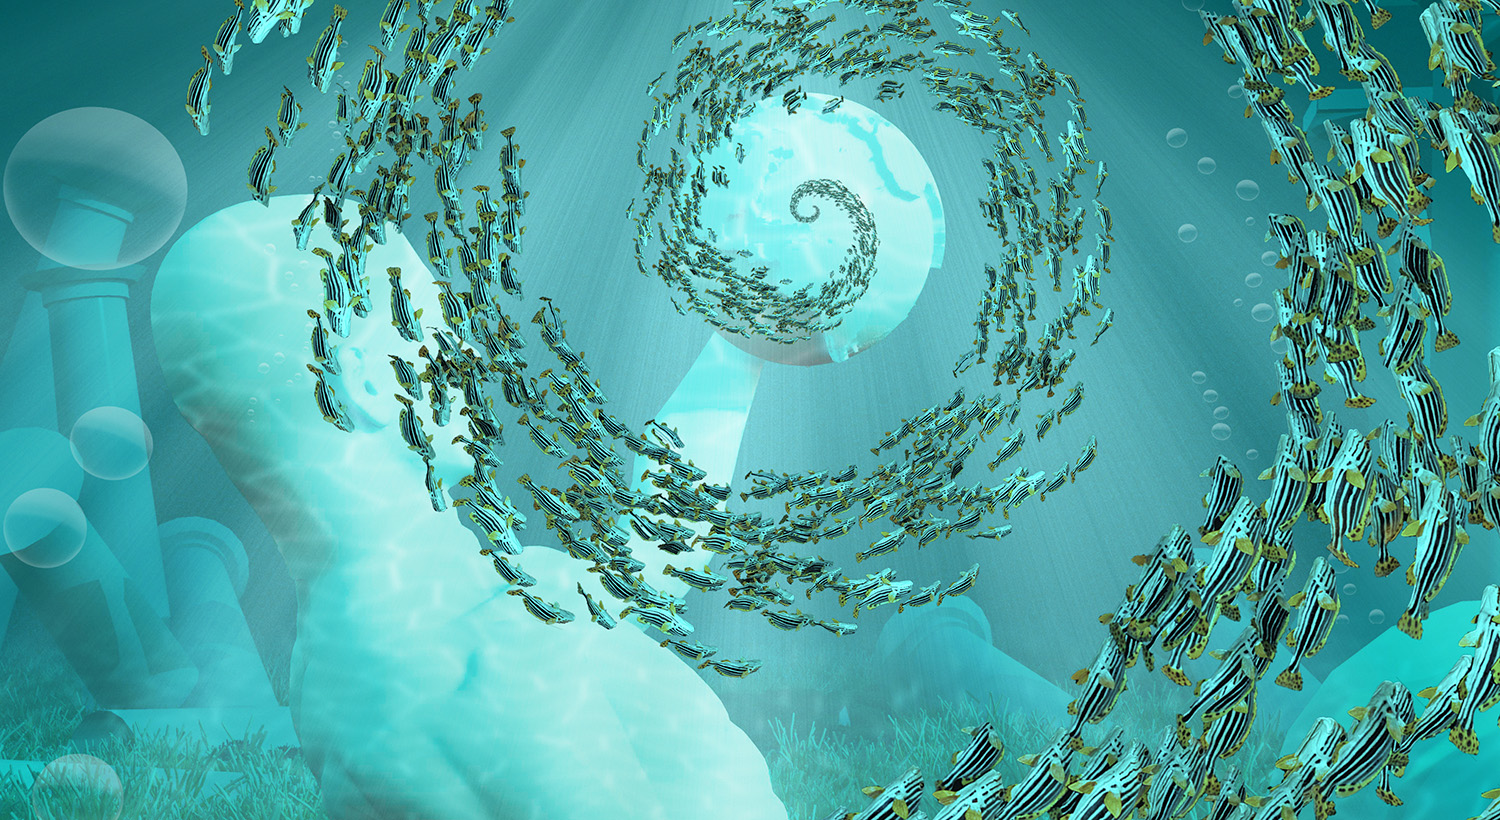 Fish Swim in spiral formation in Submerged Ruins